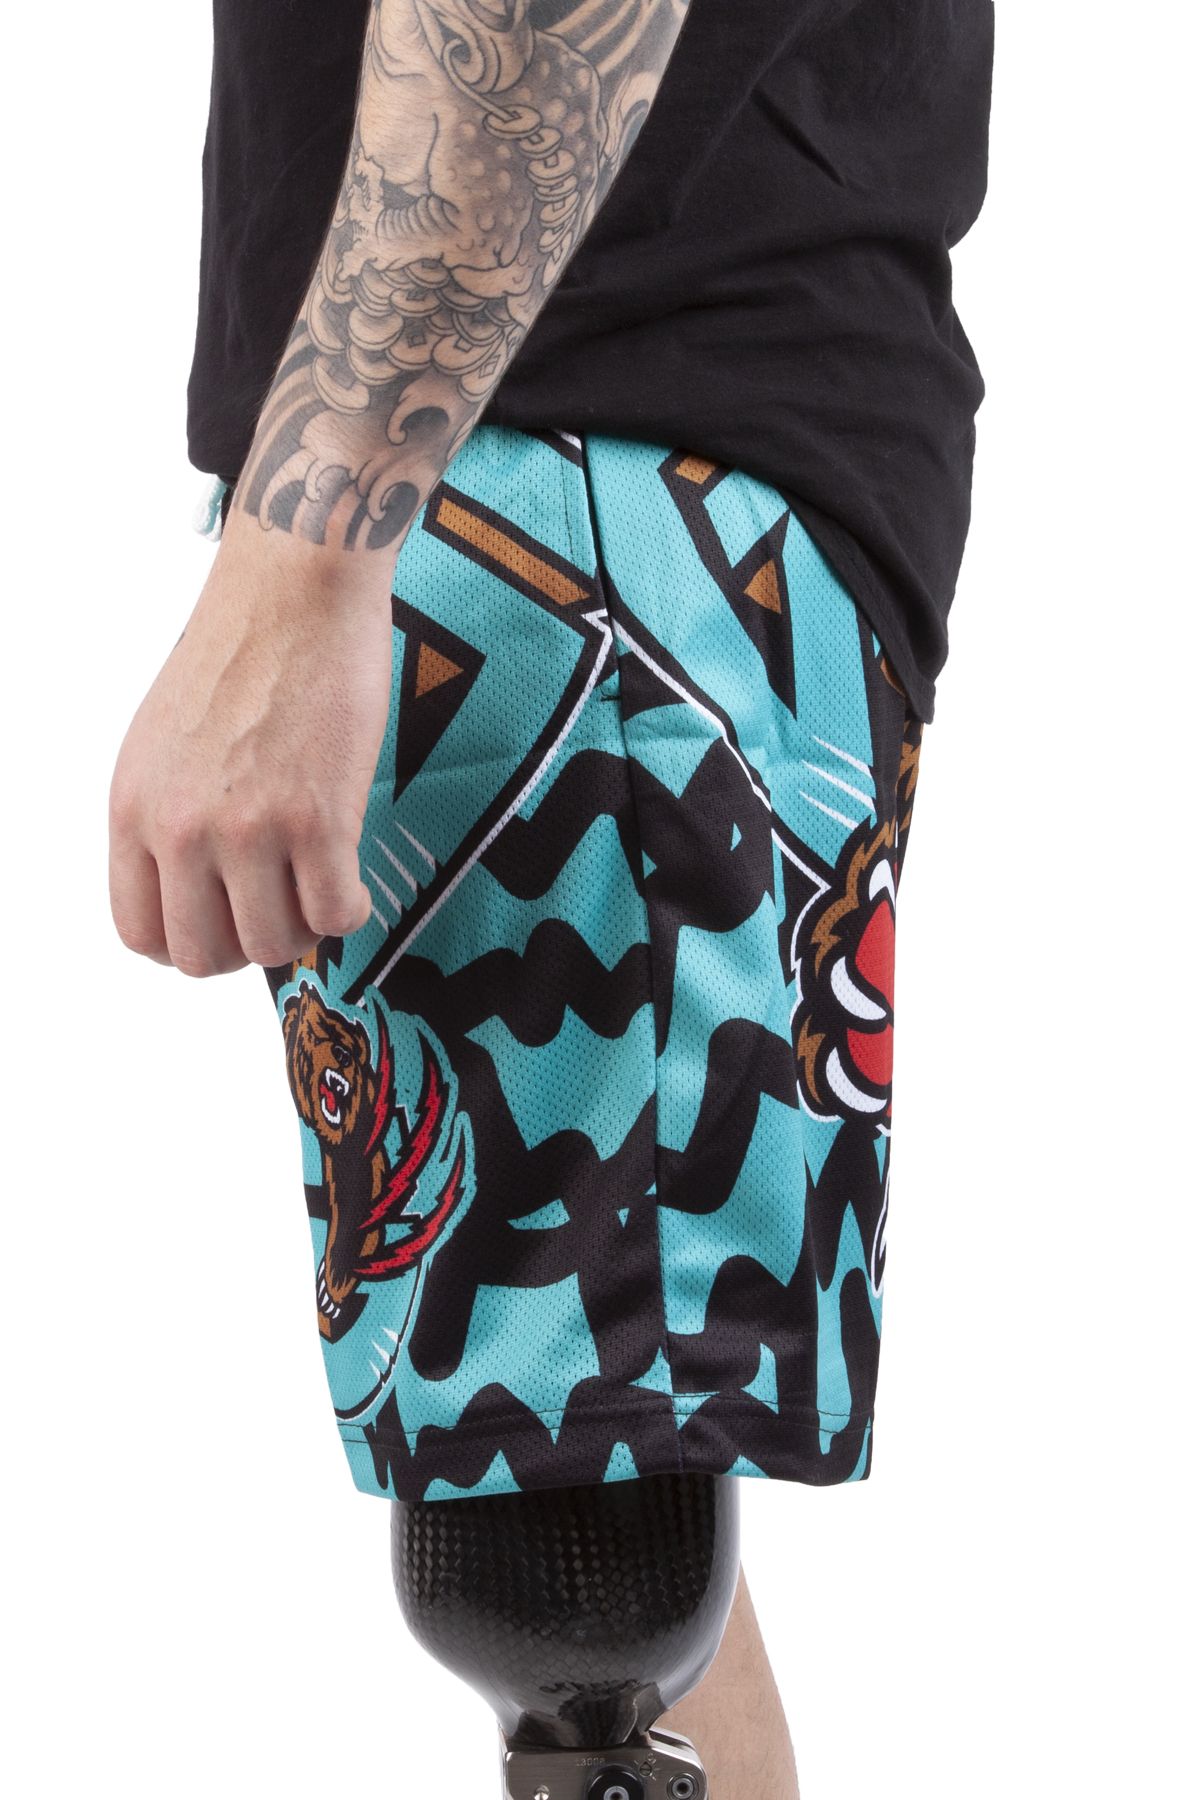 MITCHELL AND NESS Jumbotron 2.0 Sublimated Shorts Vancouver Grizzlies ...